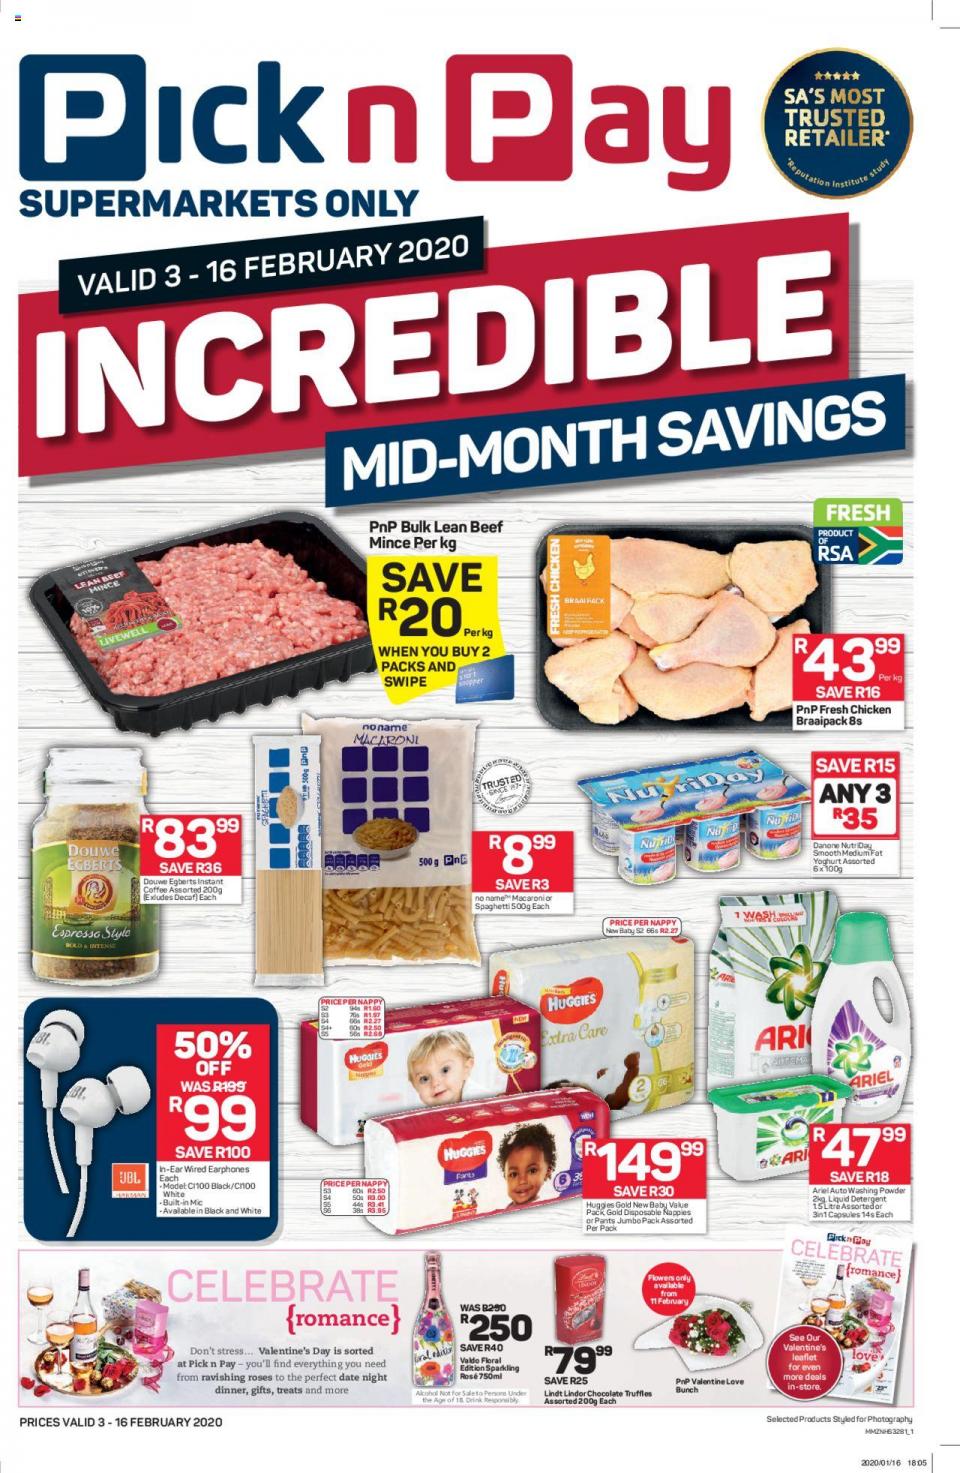 pick n pay specials incredible mid month savings 3 february 2020